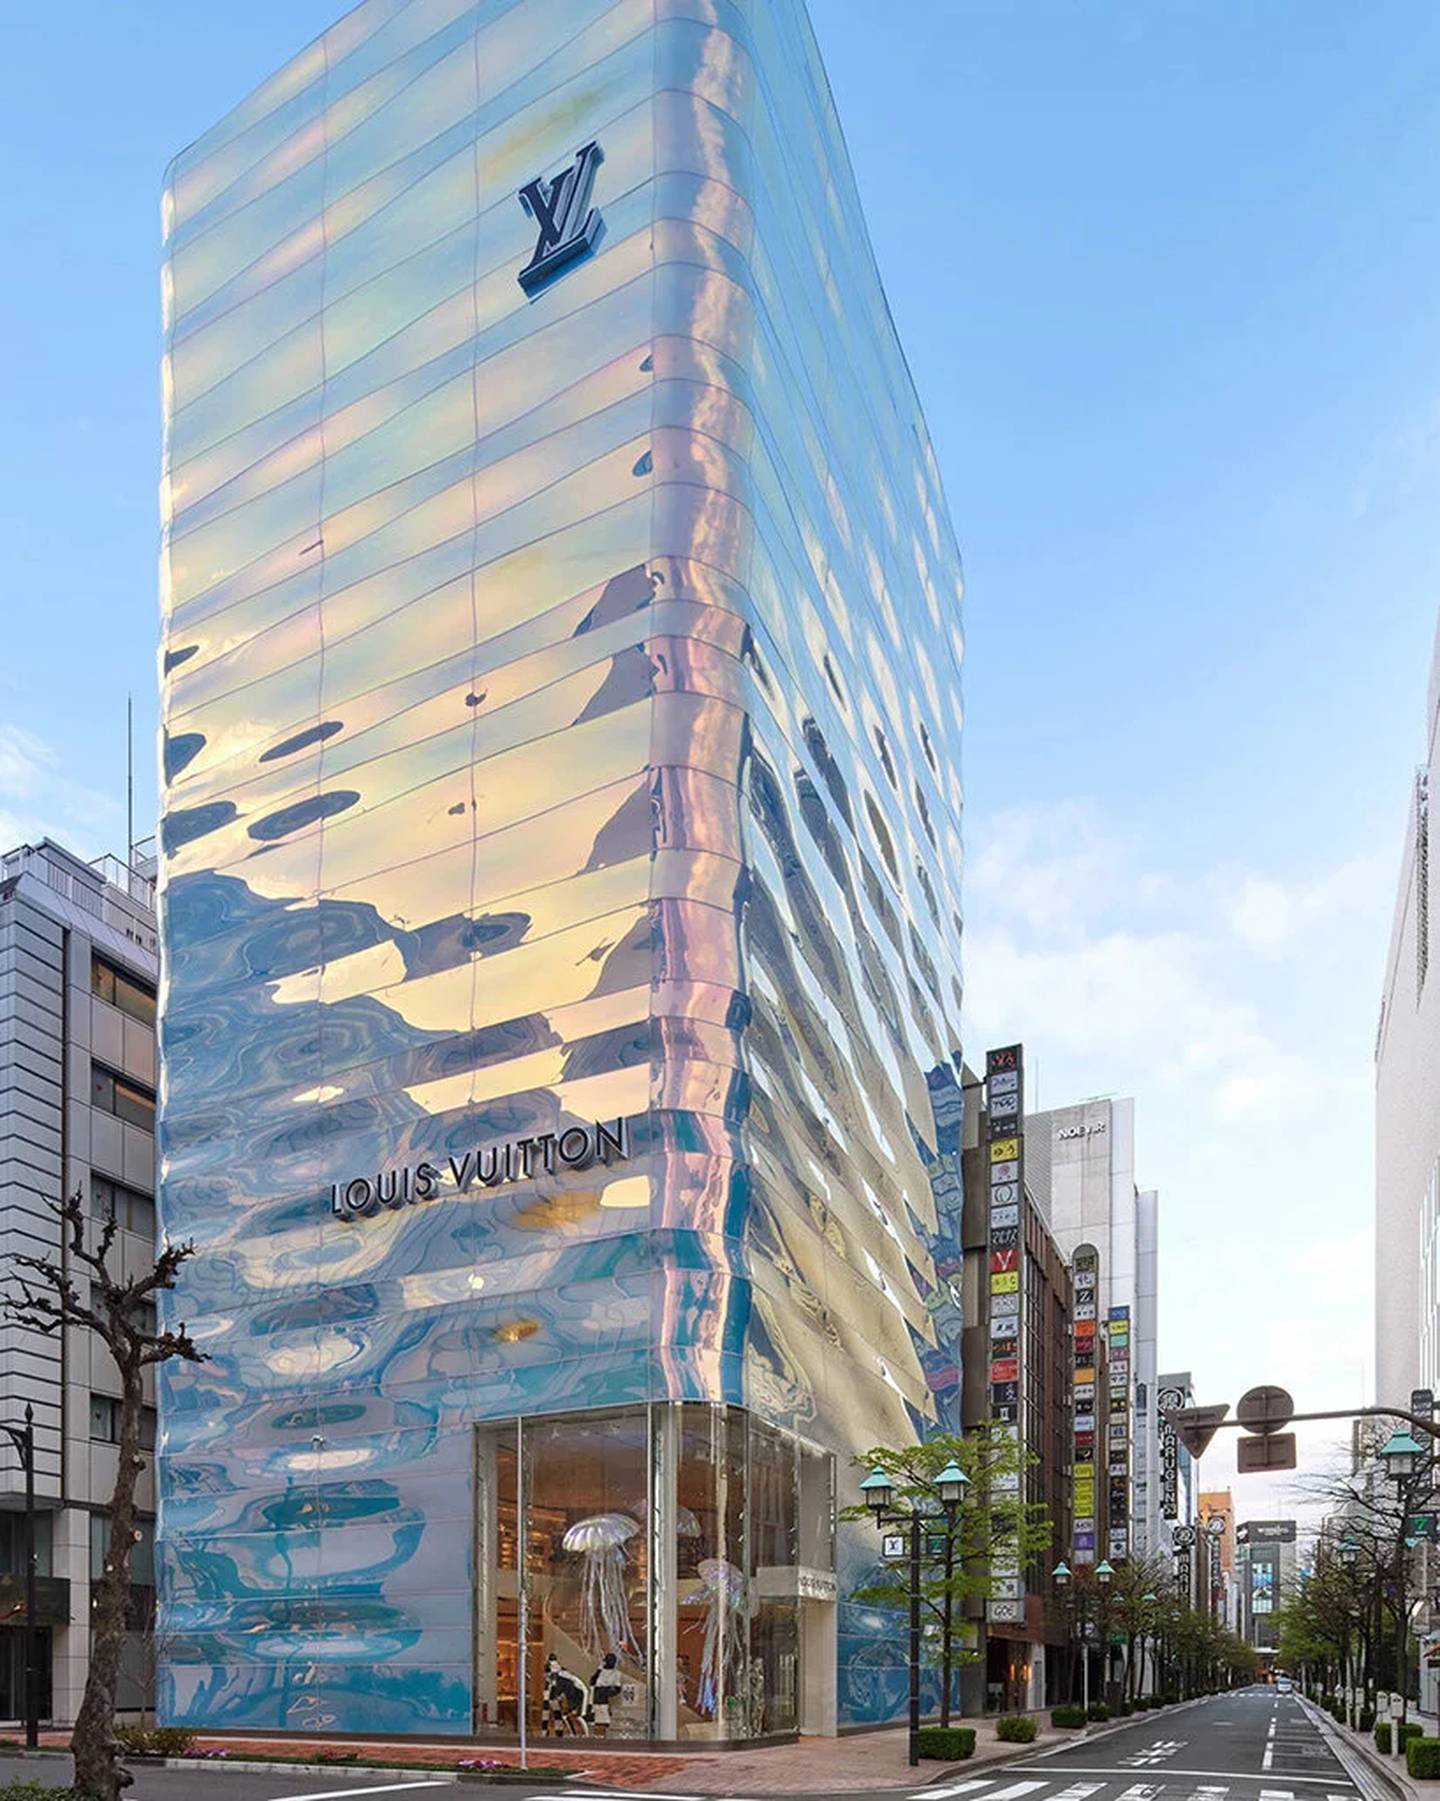 Louis Vuitton's newly re-opened Ginza store has a facade inspired by the waves of Tokyo Bay. Louis Vuitton